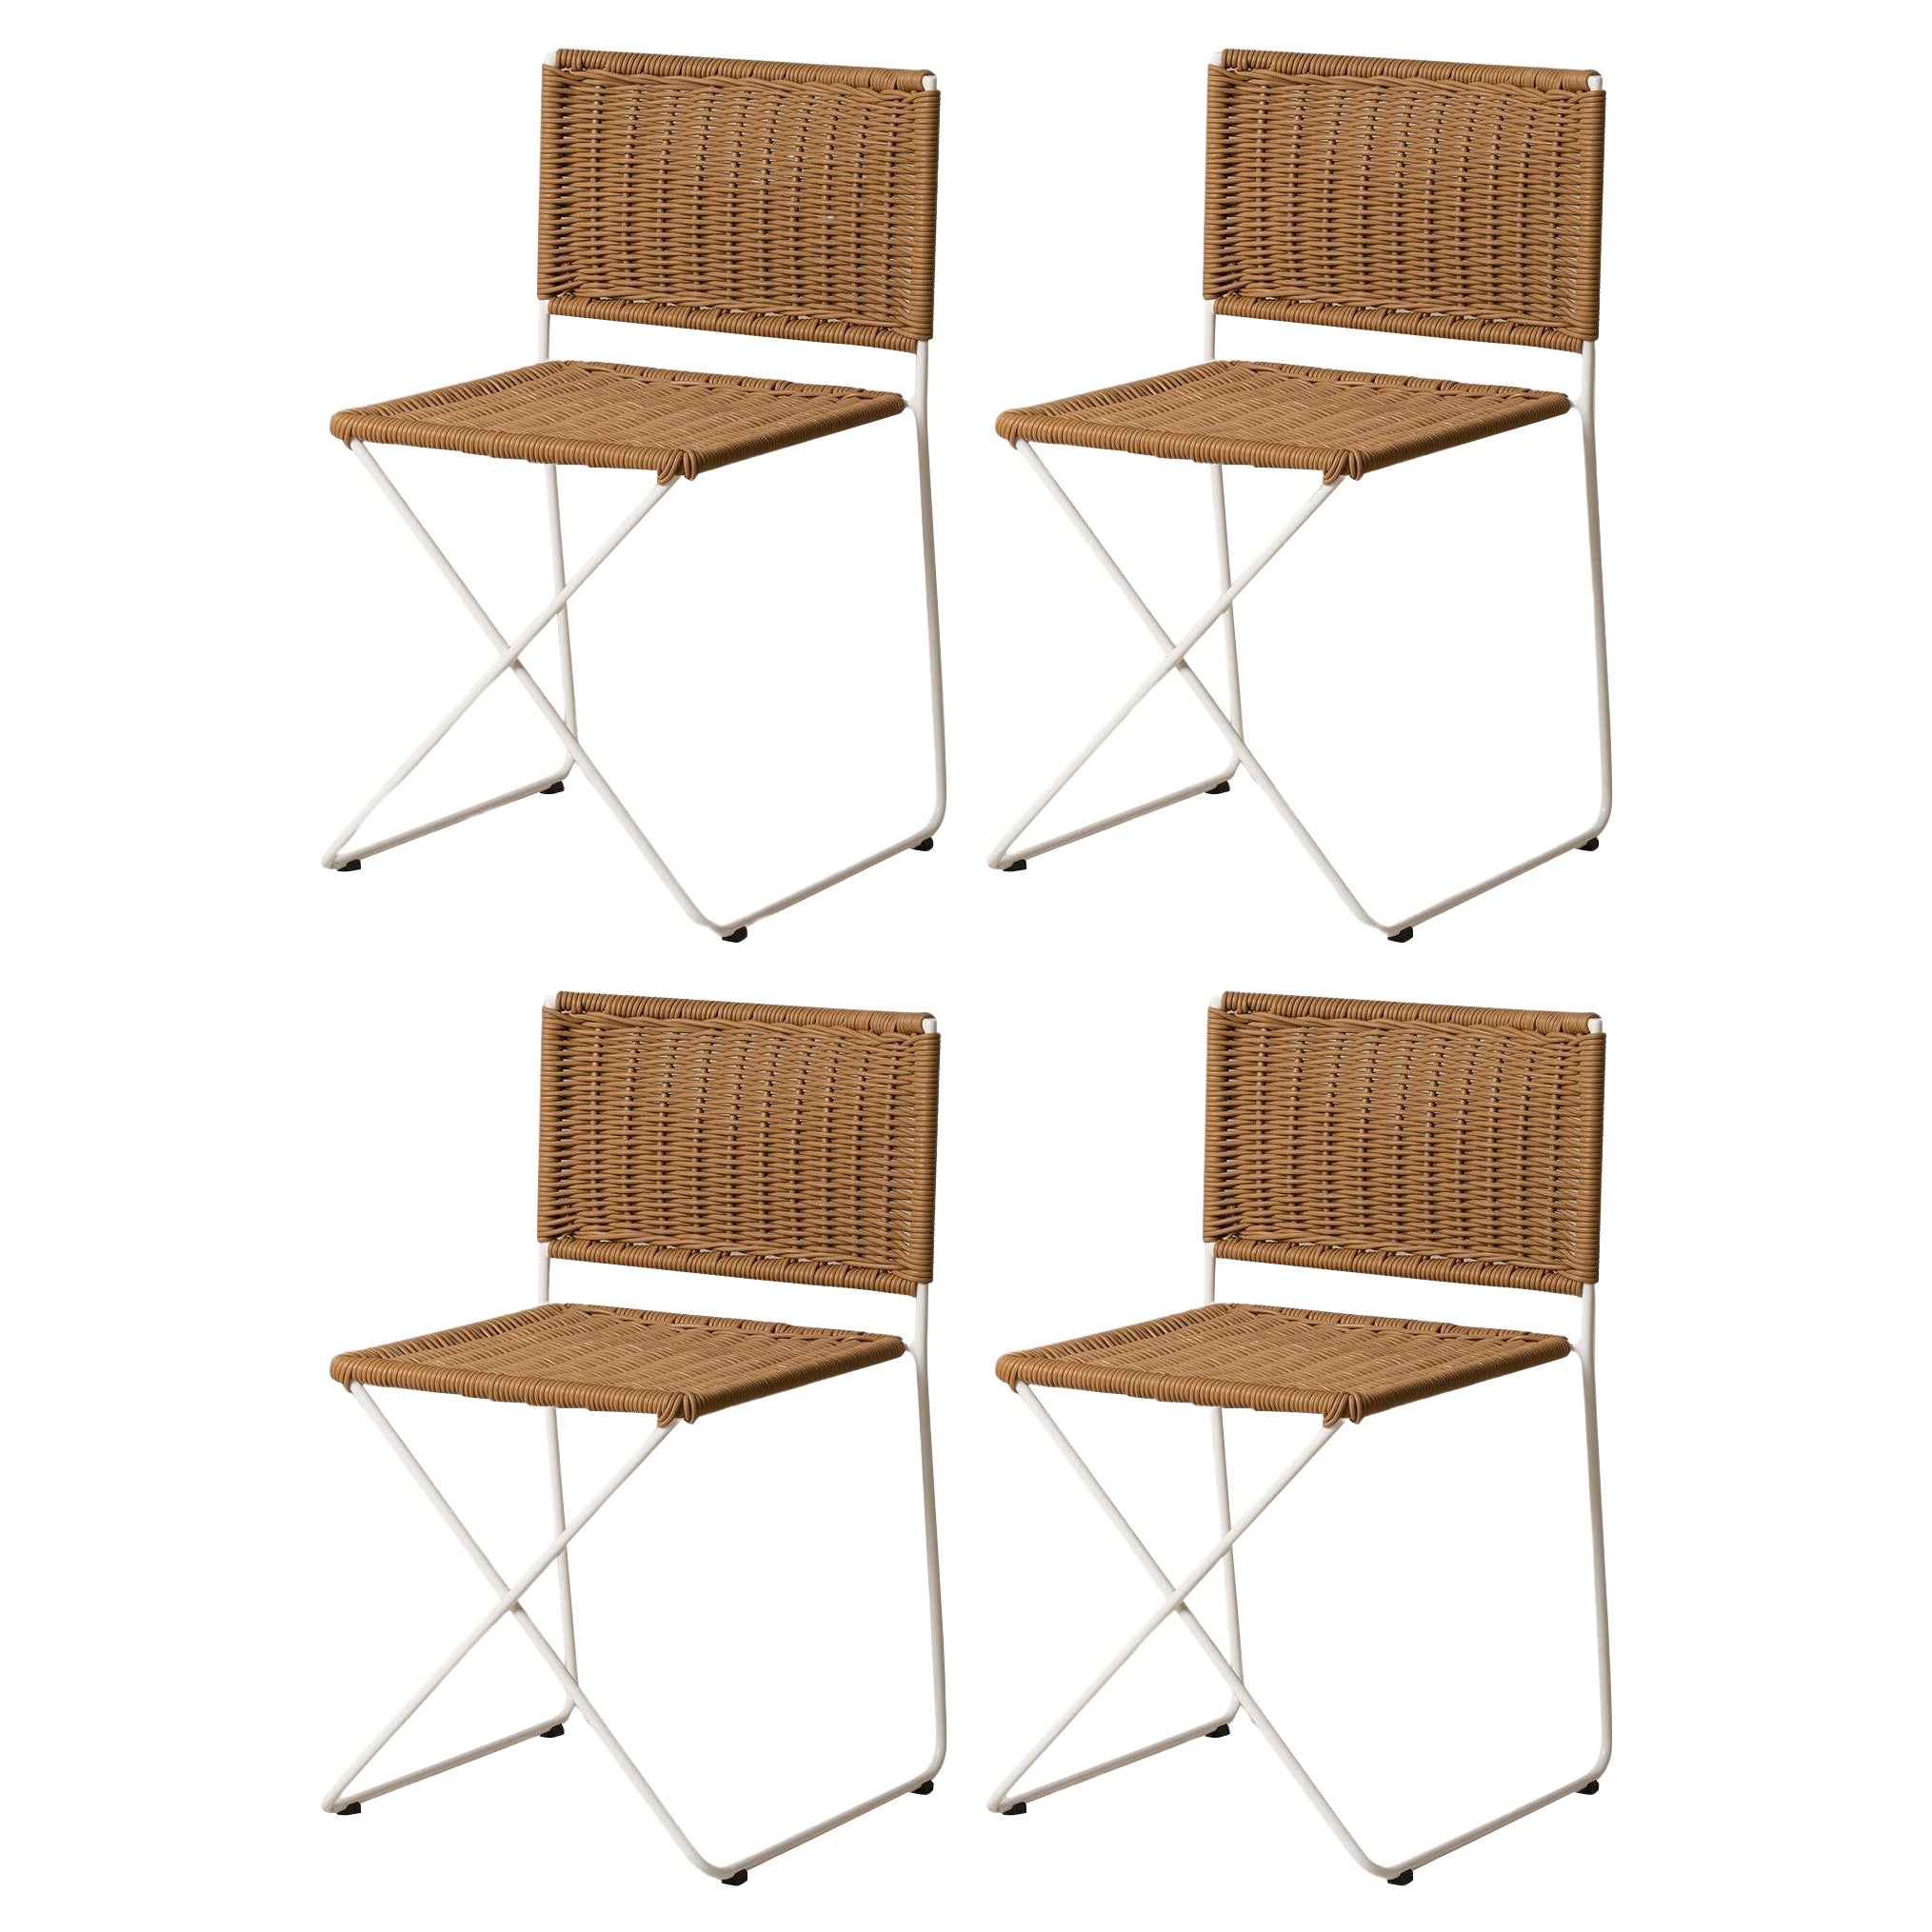 Set of 4 Natural Ramón Chair by Ramón Bigas For Sale